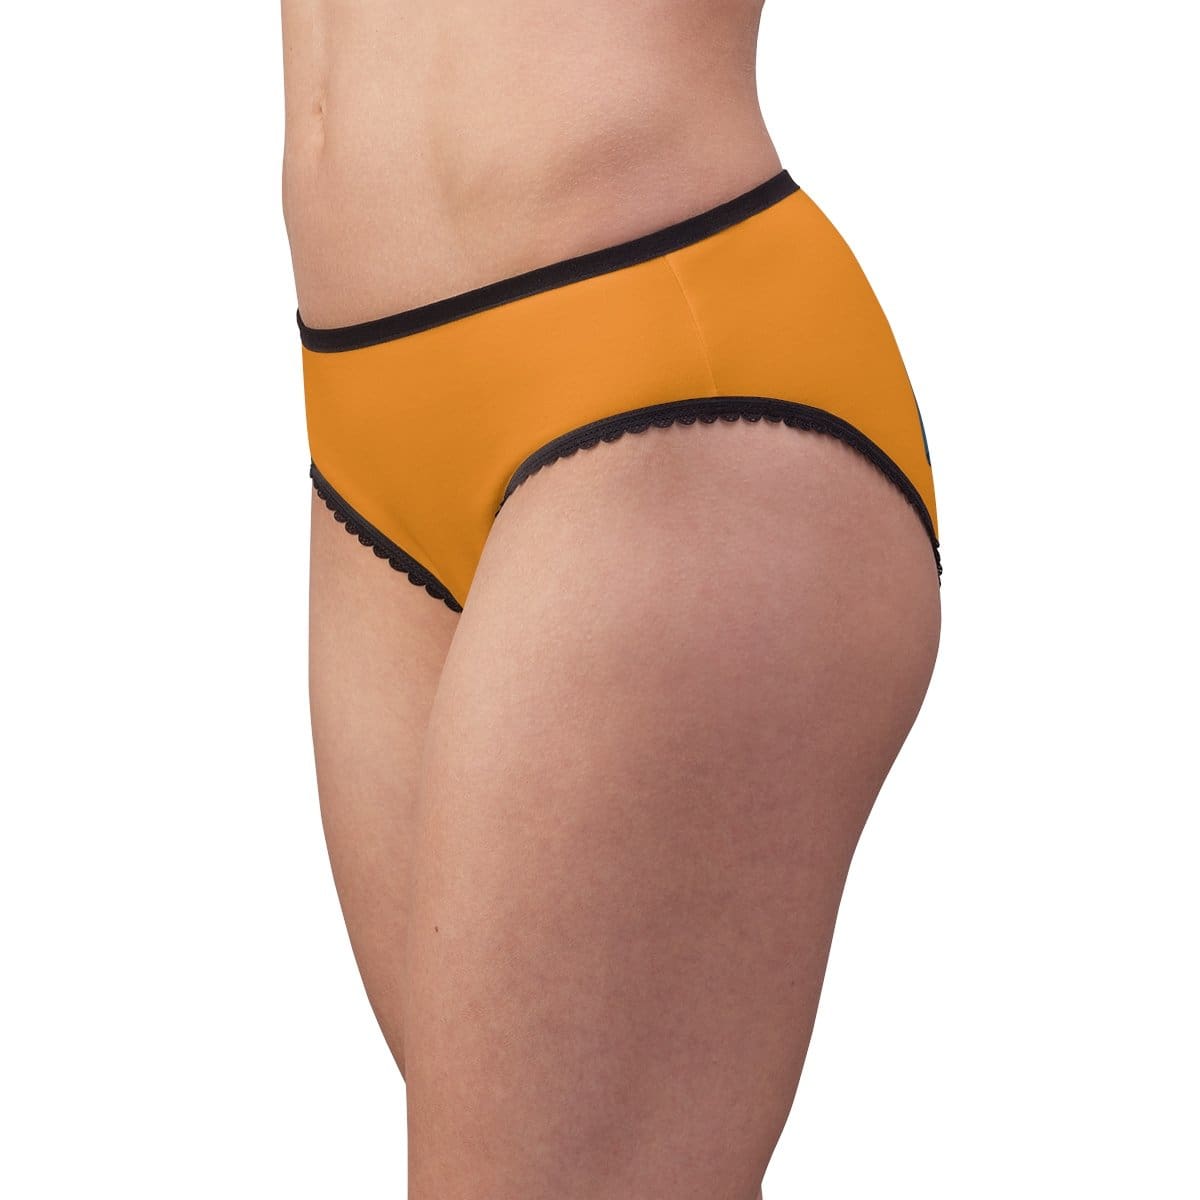 D20 All Natural - Blue on Orange Womens Briefs - All Over Prints